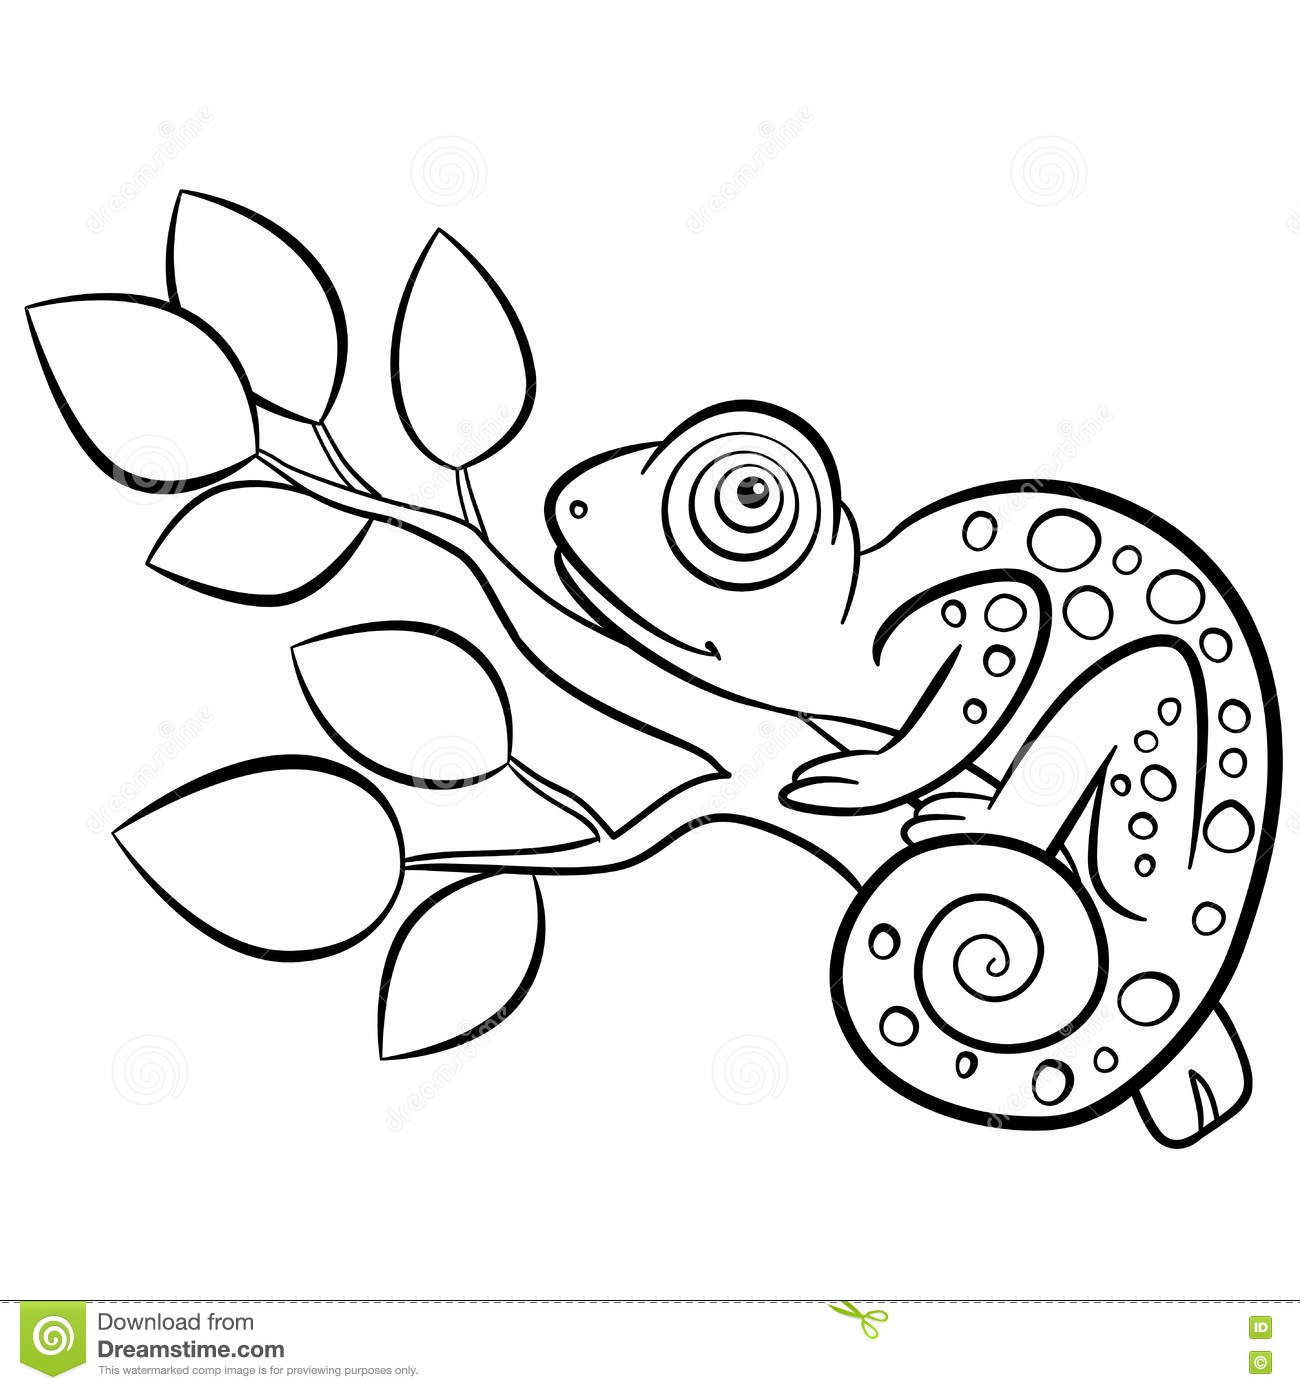 free-printable-chameleon-coloring-pages-boringpop